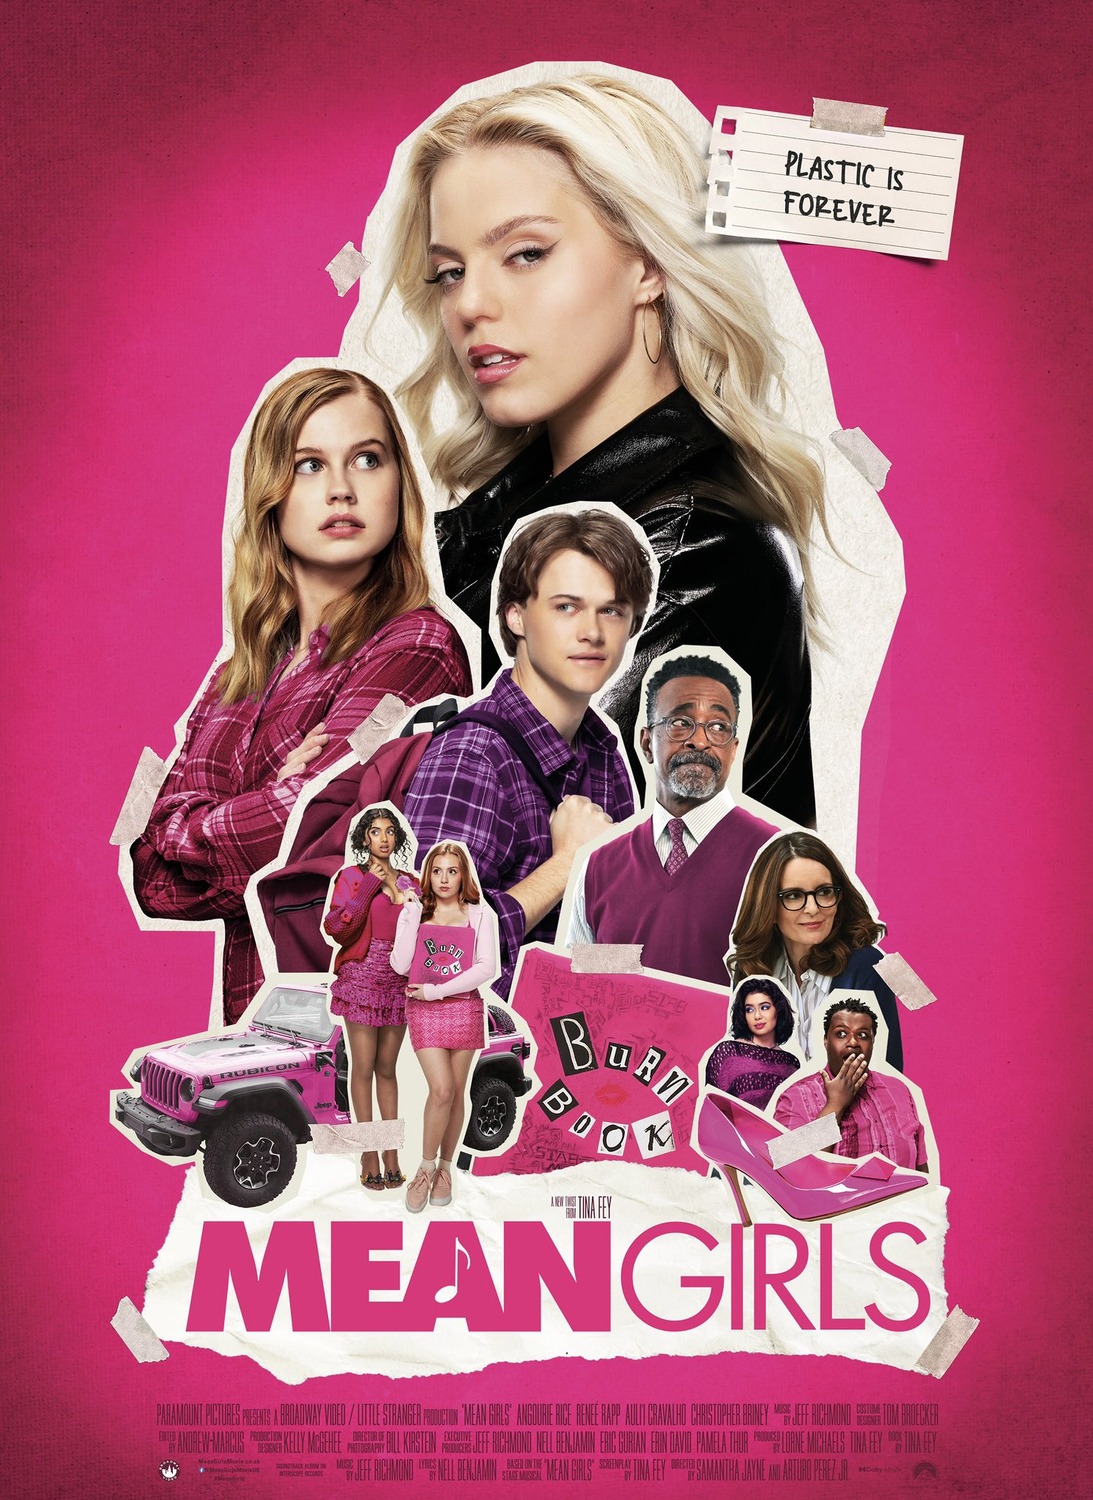 REVIEW: Mean Girls ‘24 doesn’t measure up to original, what happened?